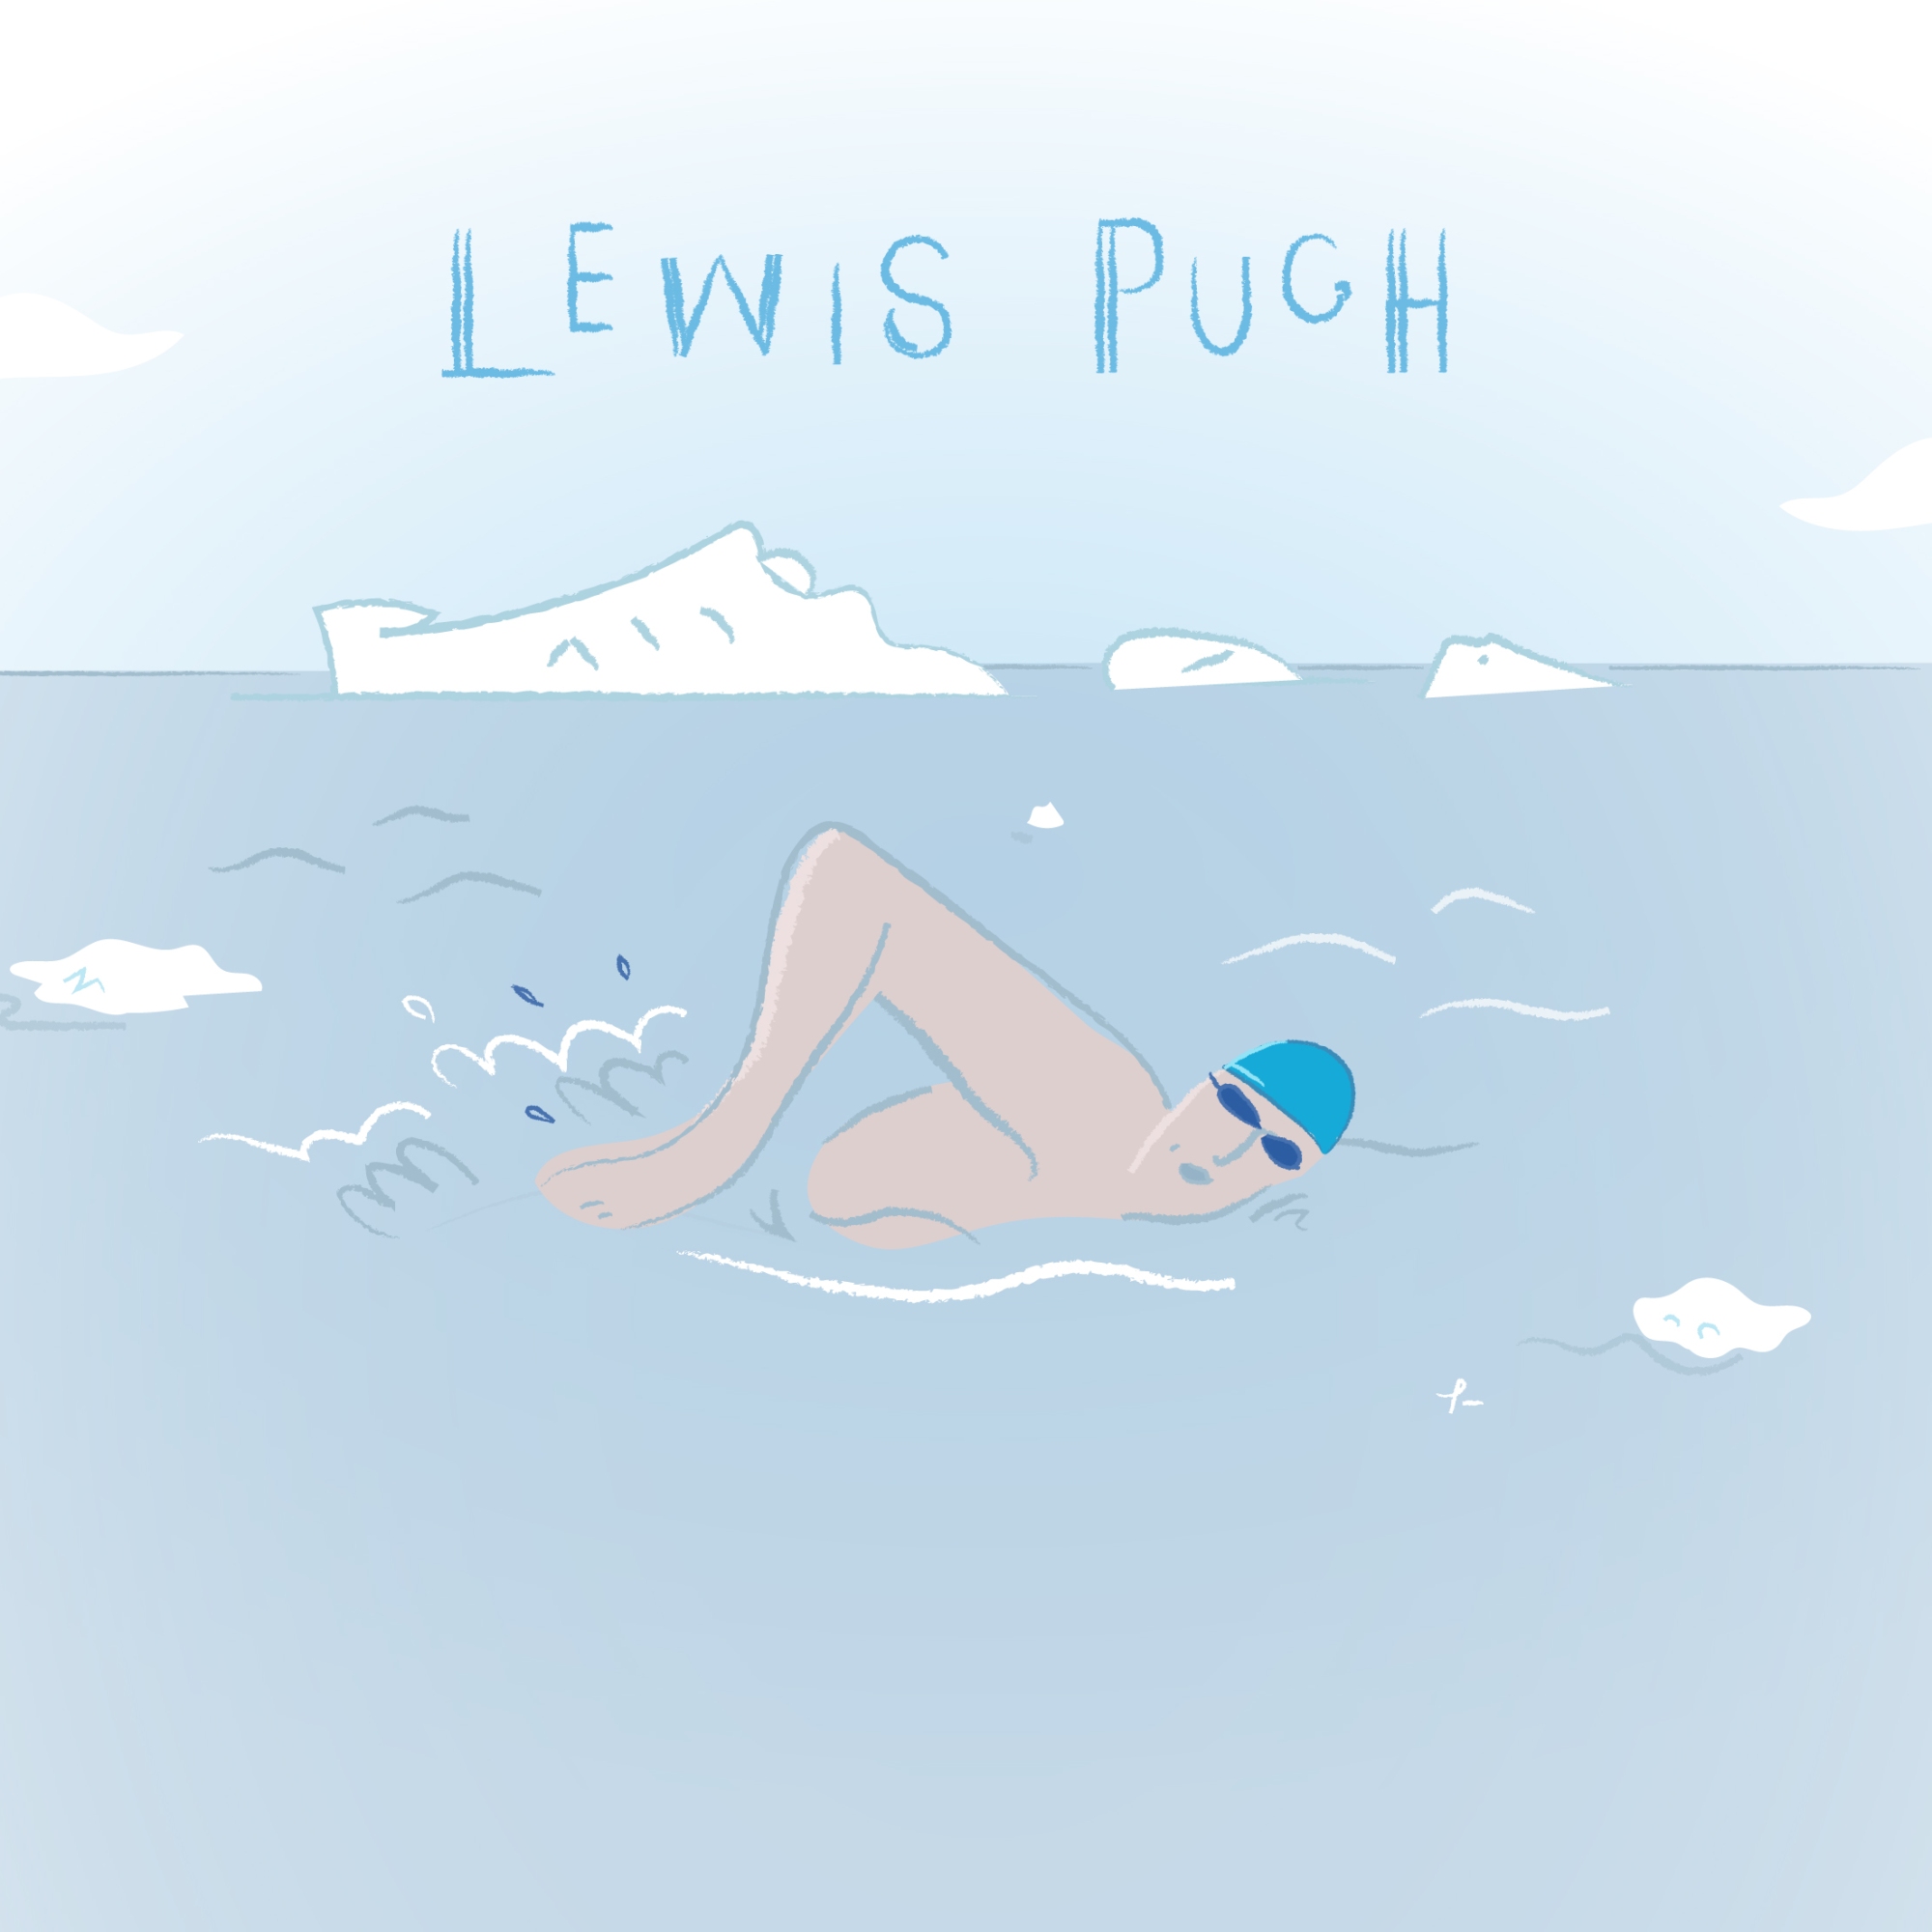 An illustration of Lewis Pugh swimming in icy water. He is wearing a blue cap and an iceberg is visible in the background